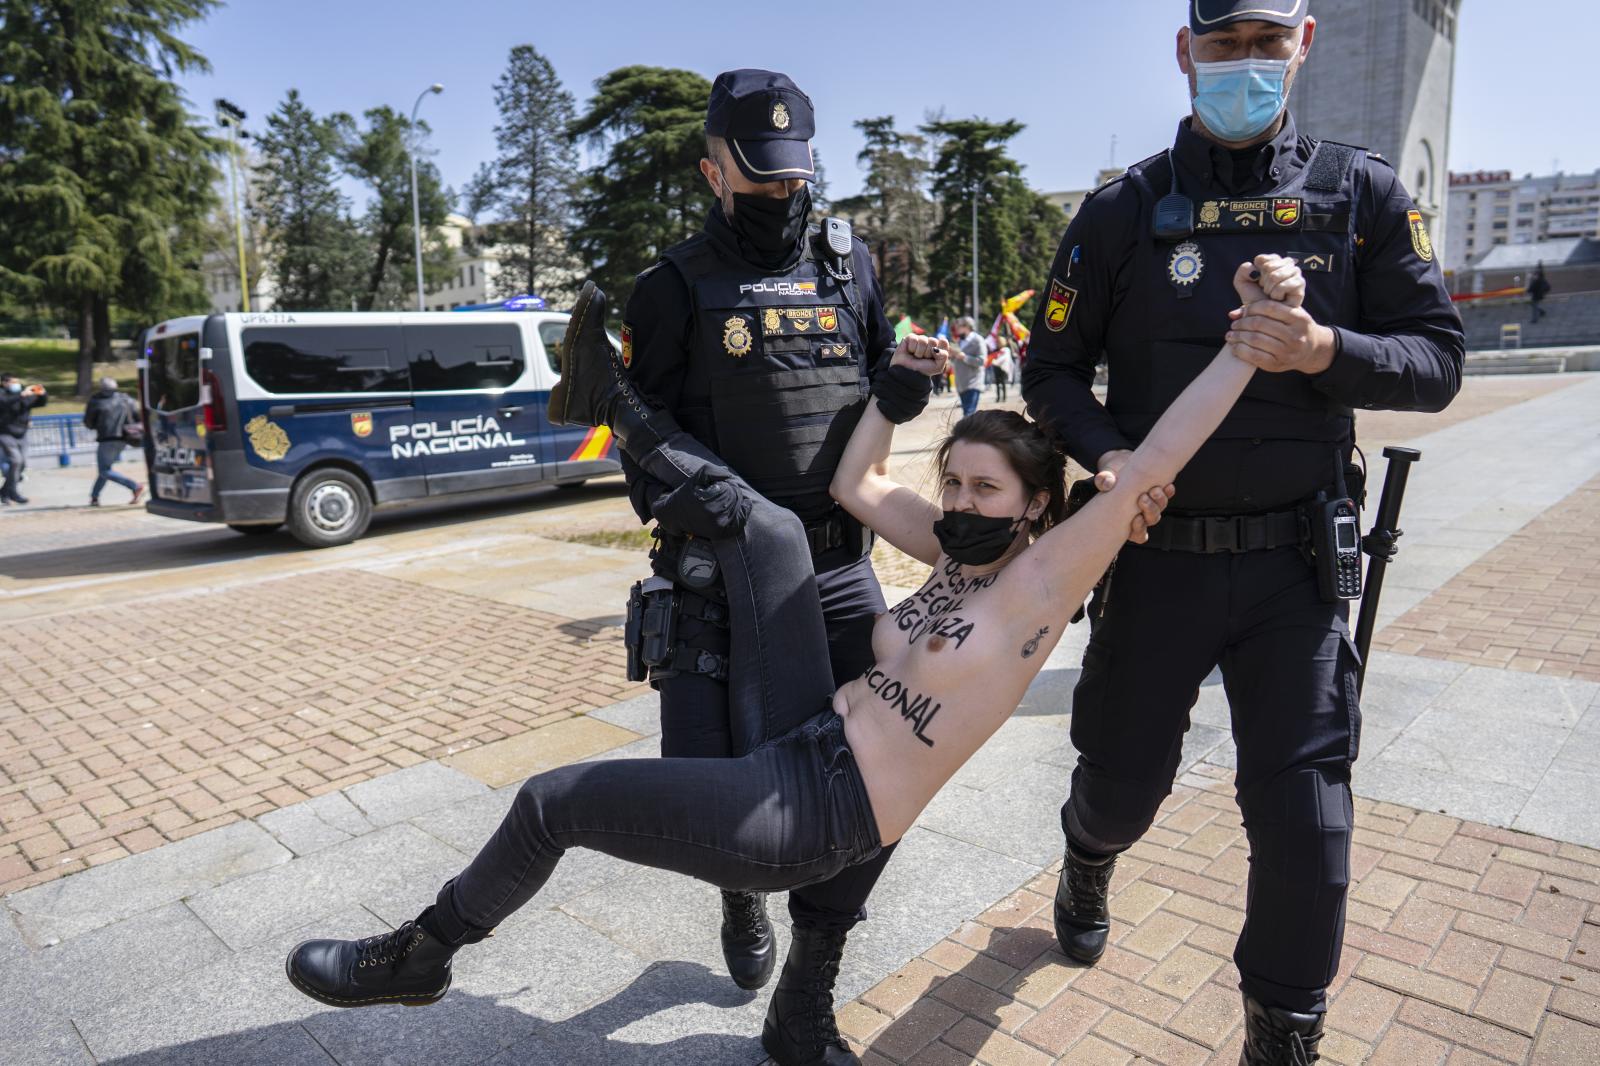 Image from Overview - Activists from Femen Spain burst into an event organised...